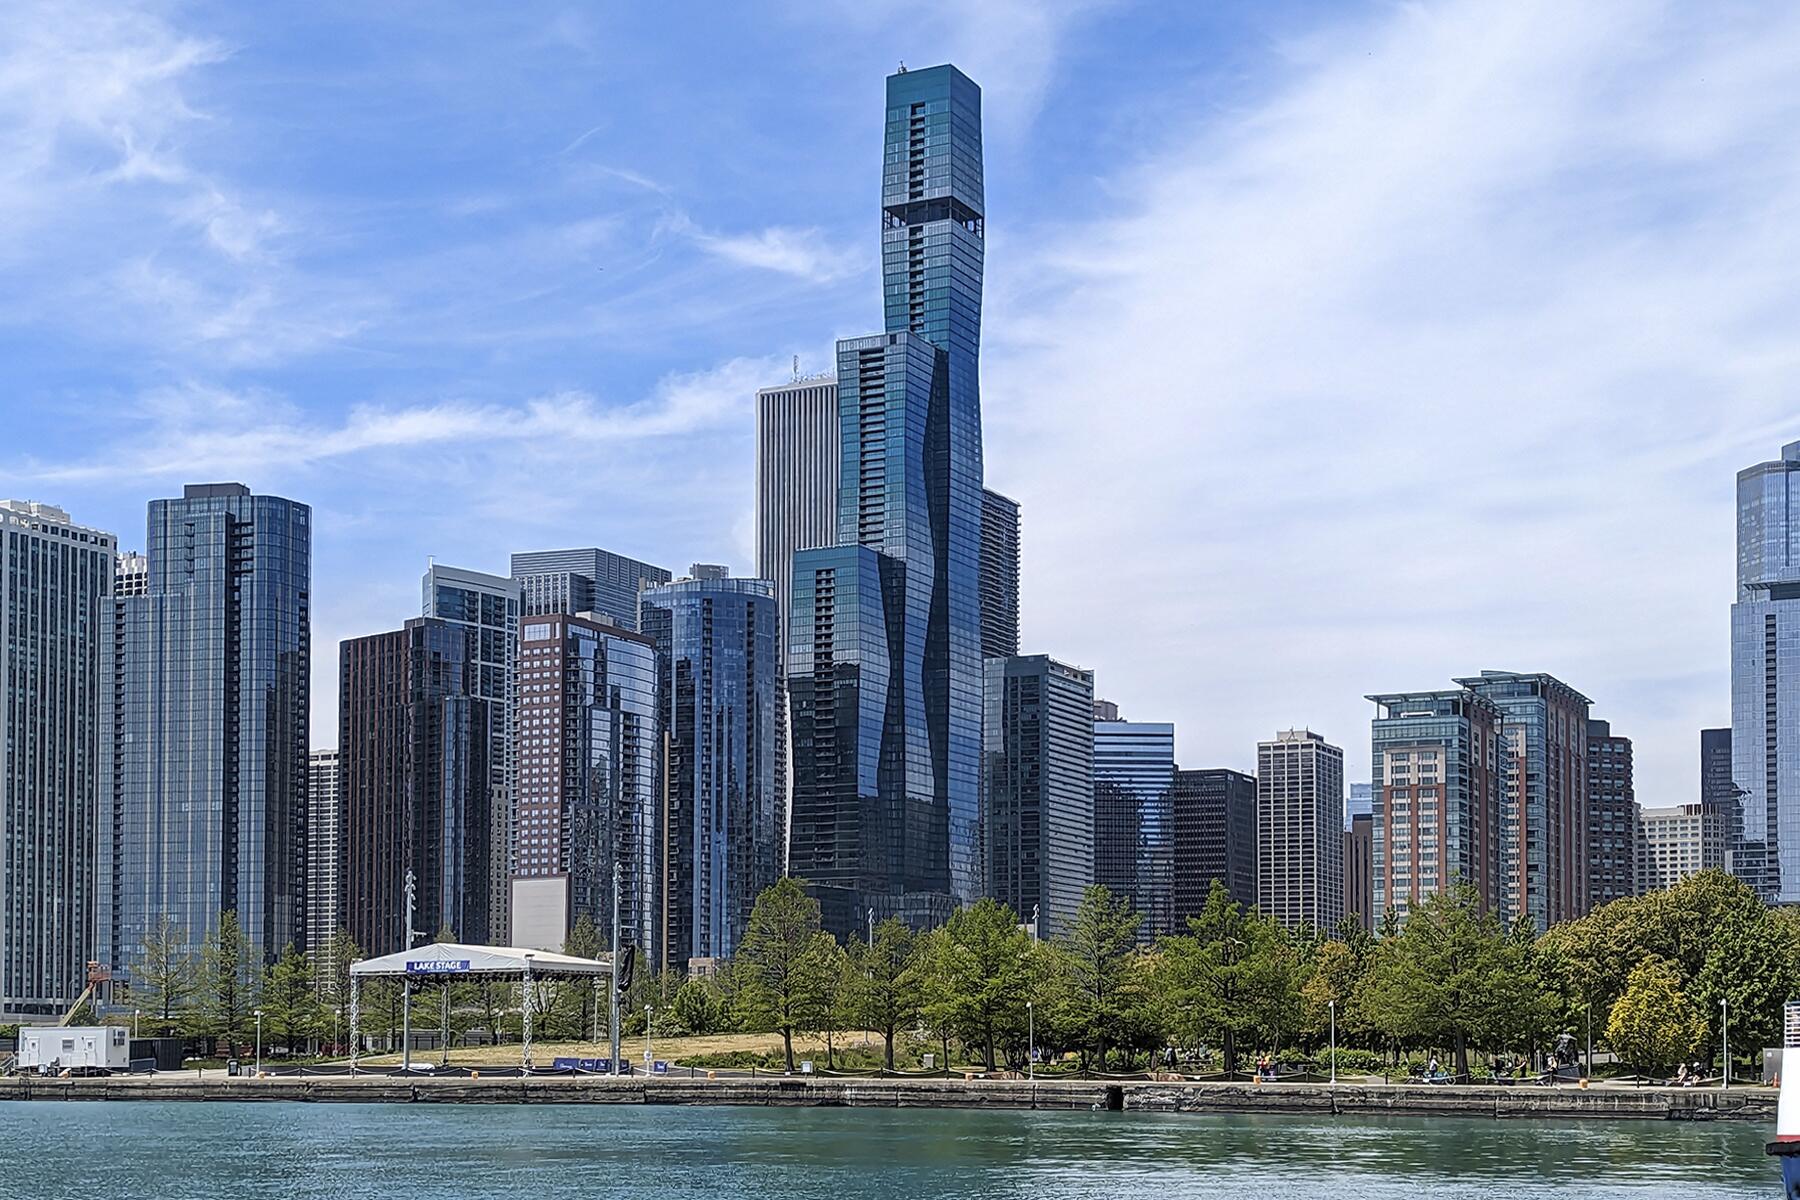 <a href='https://www.fodors.com/world/north-america/usa/illinois/chicago/experiences/news/photos/how-to-see-chicagos-best-architecture#'>From &quot;13 Ways to See Chicago's Best Architecture: The St. Regis Chicago&quot;</a>